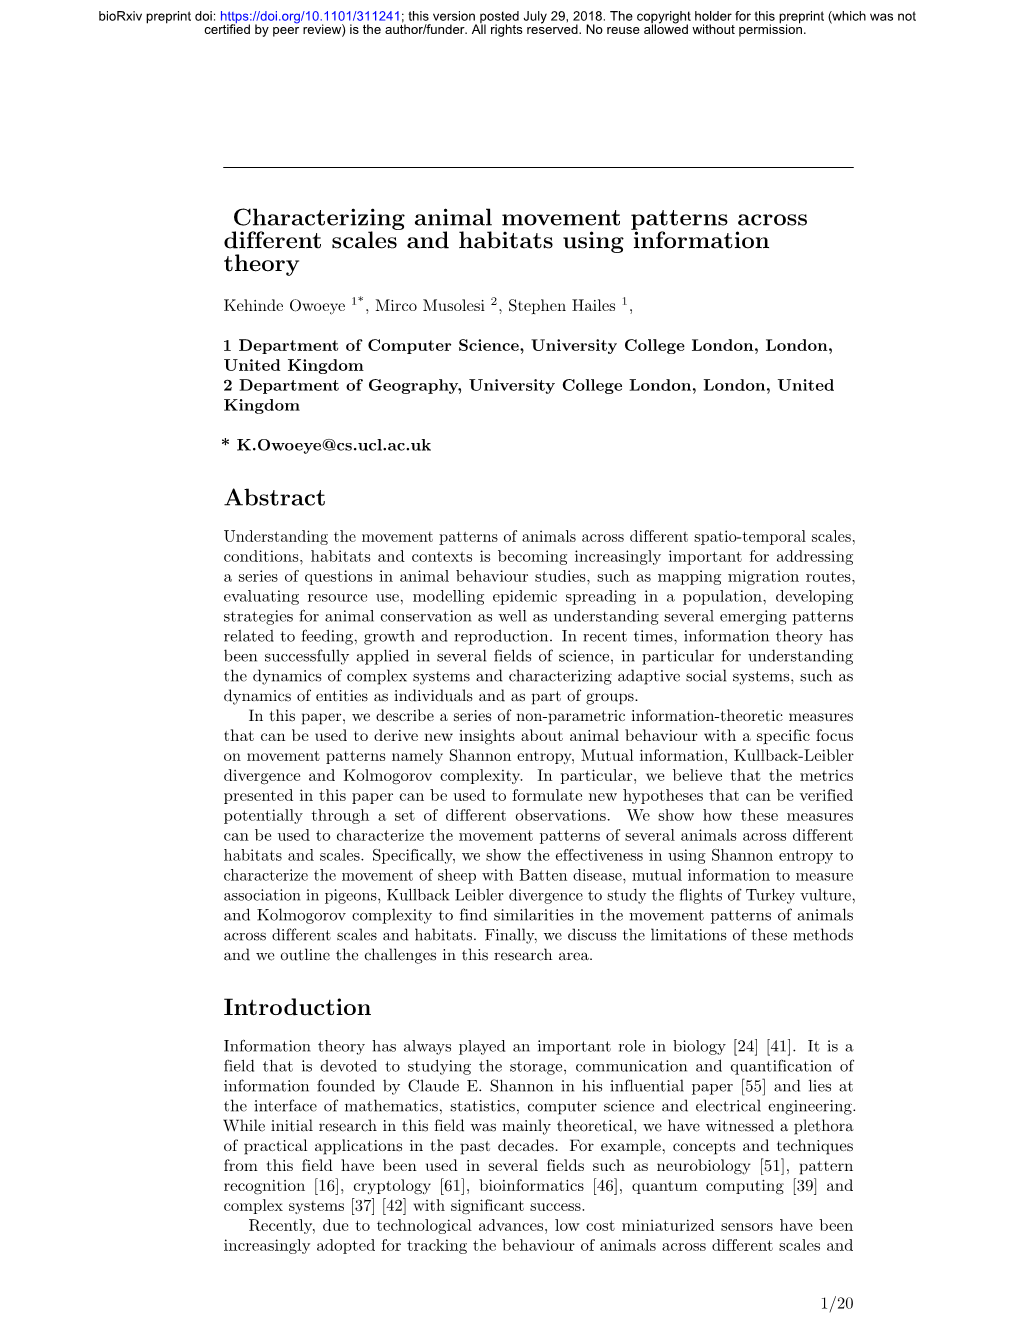 Characterizing Animal Movement Patterns Across Different Scales and Habitats Using Information Theory Abstract Introduction